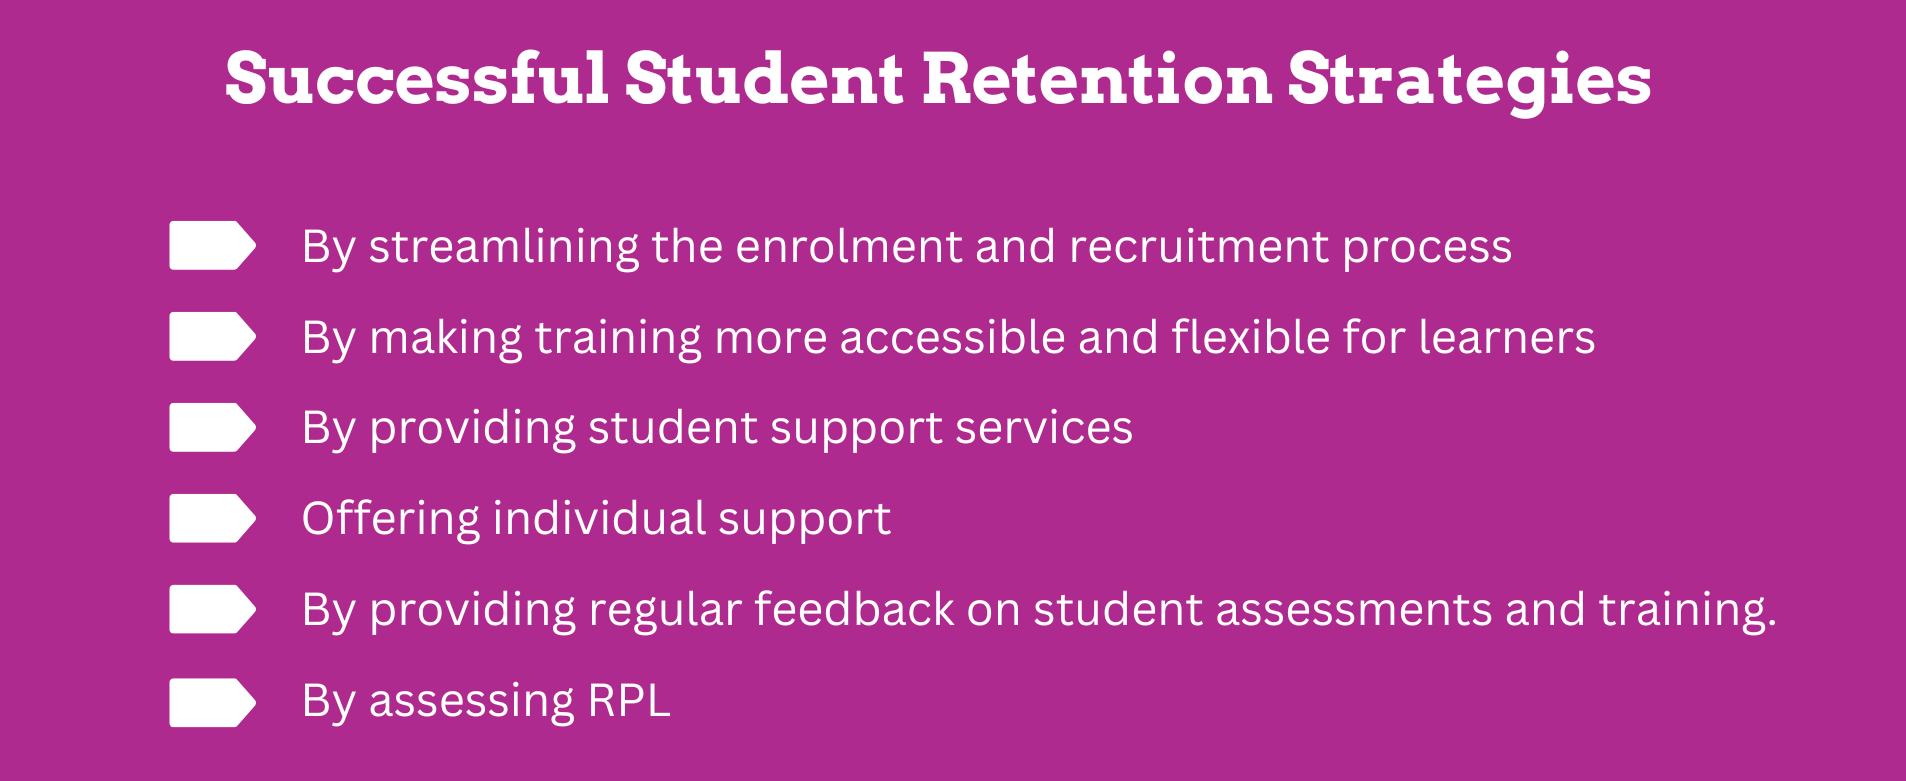 Strategies to retain more students